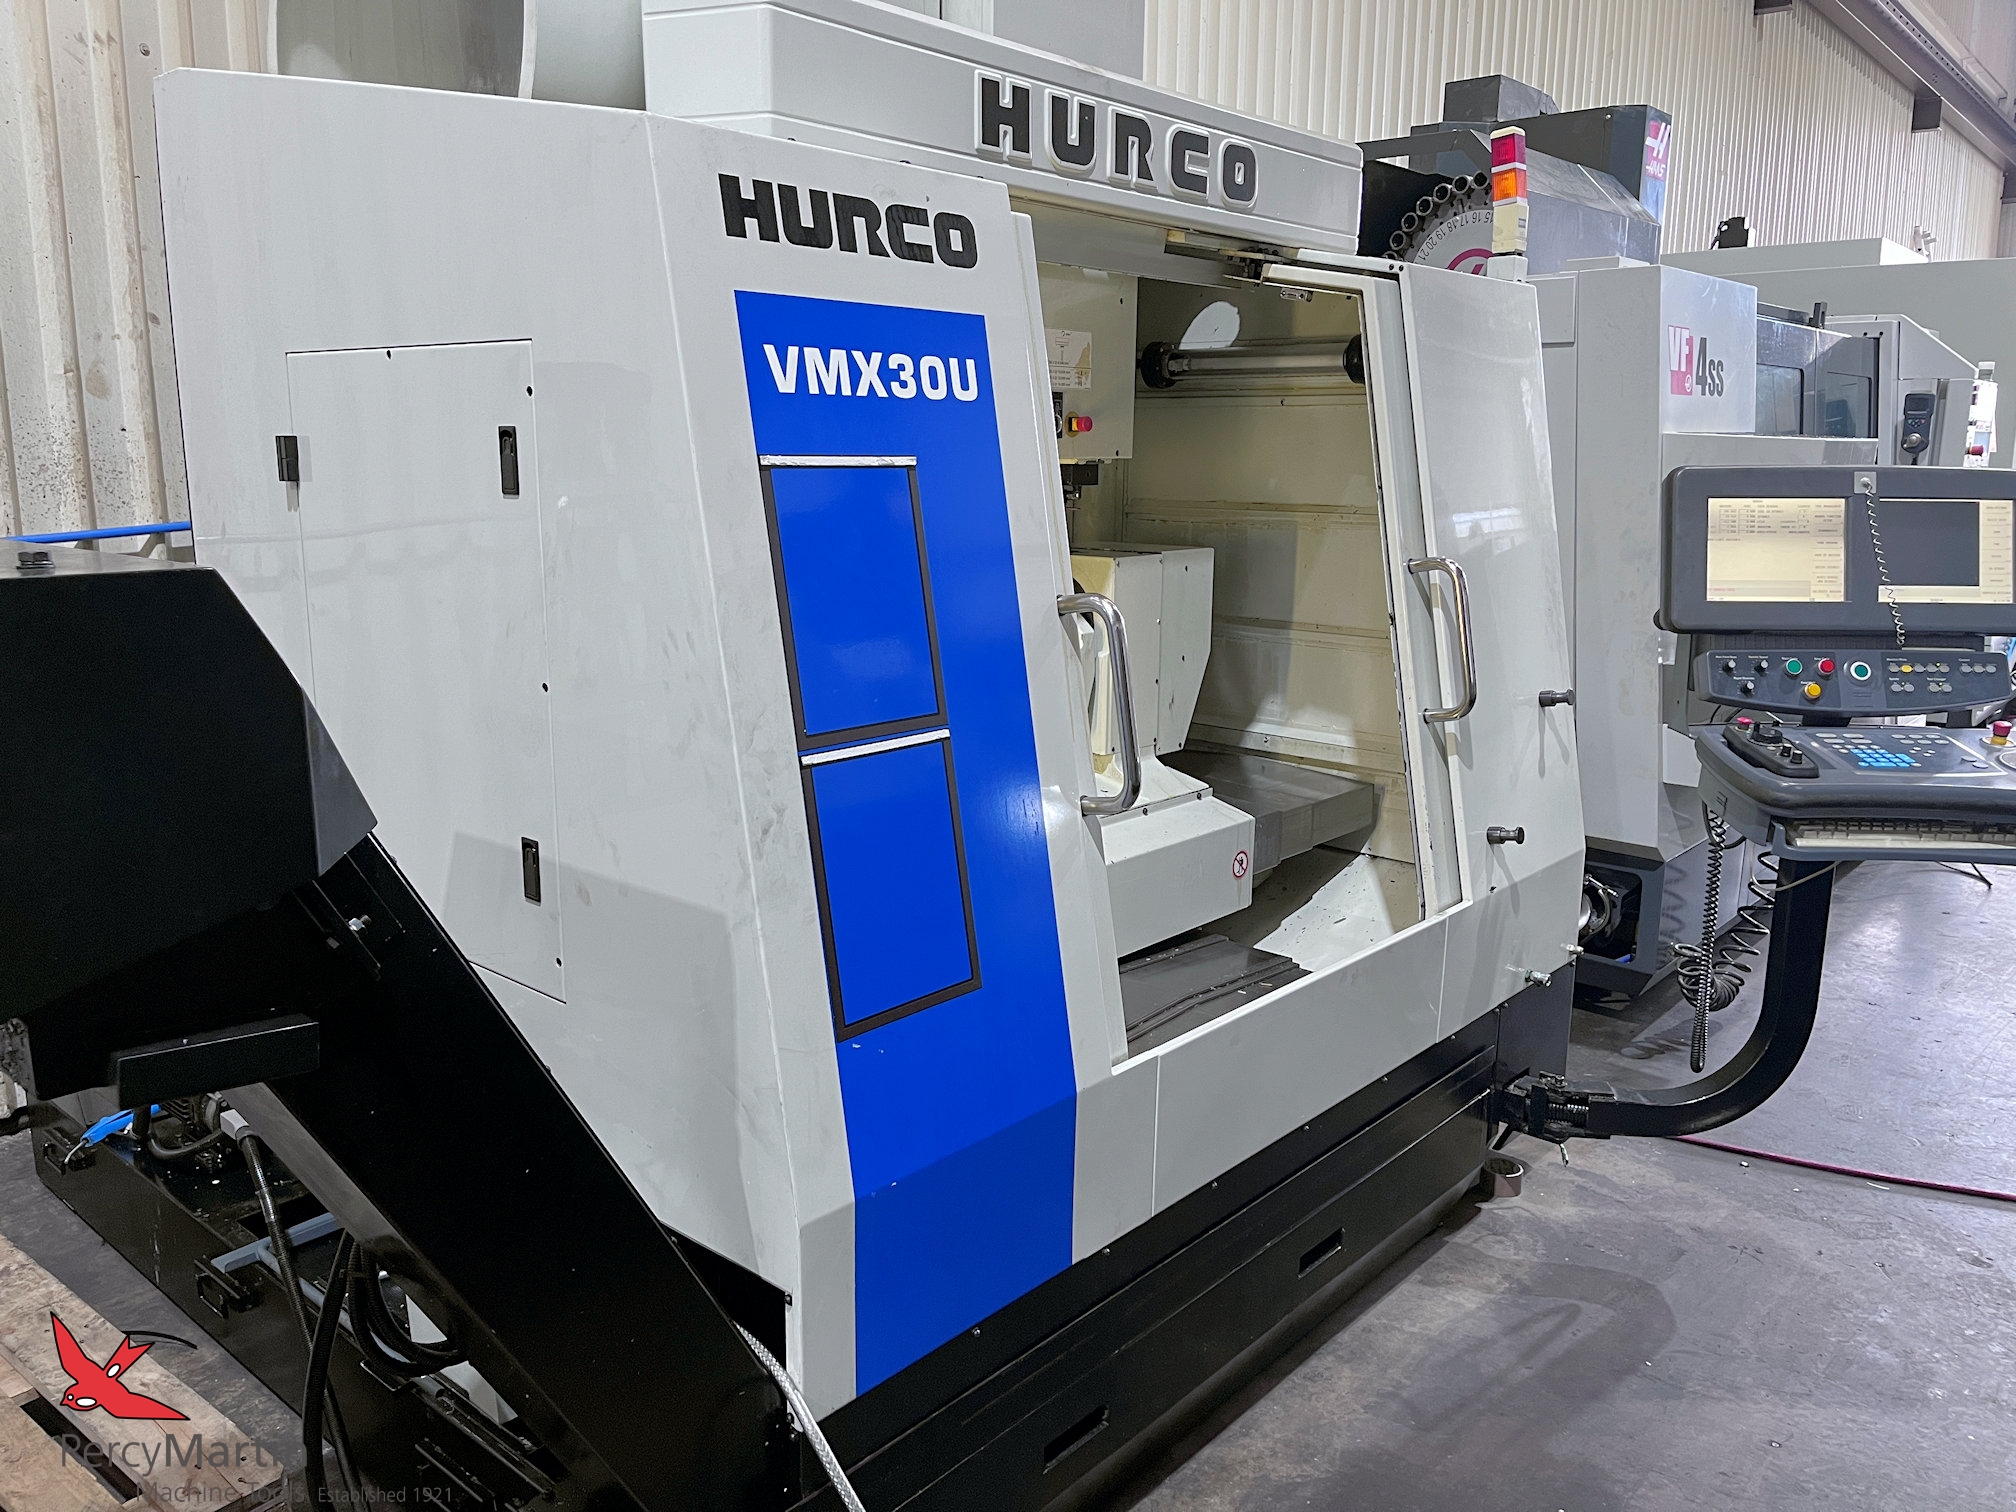 Used Hurco Vmx30u 2010 5 Axis Machining Centres For Sale Percy Martin